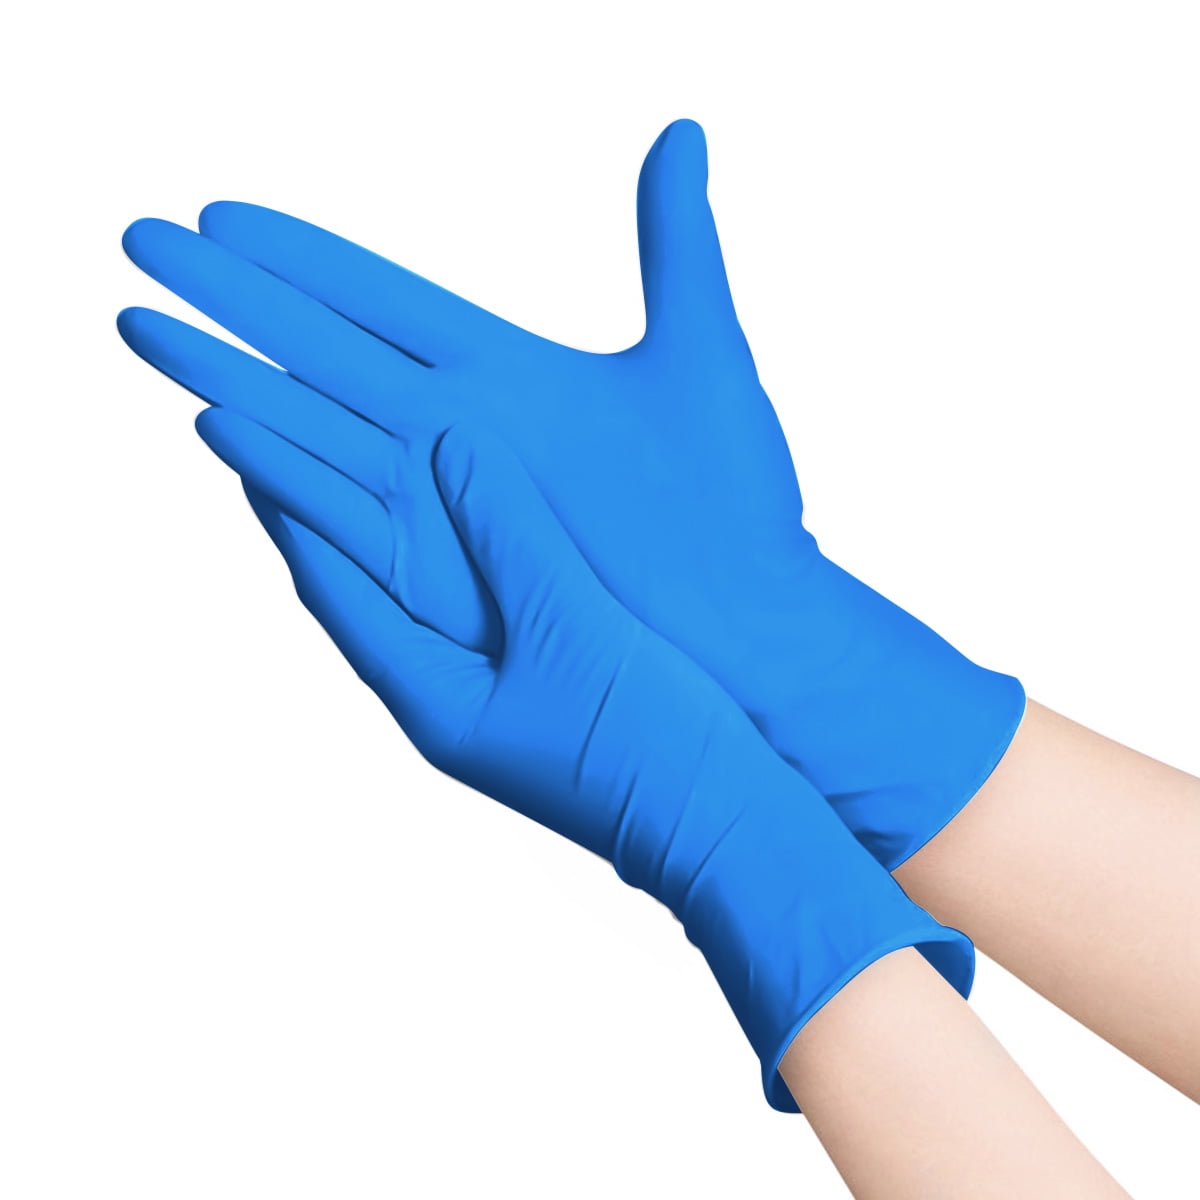 Blue Gloves Disposable Latex Free,100 Pcs Disposable Exam Gloves,Cleaning Gloves Powder Free for All Purposes Gloves 